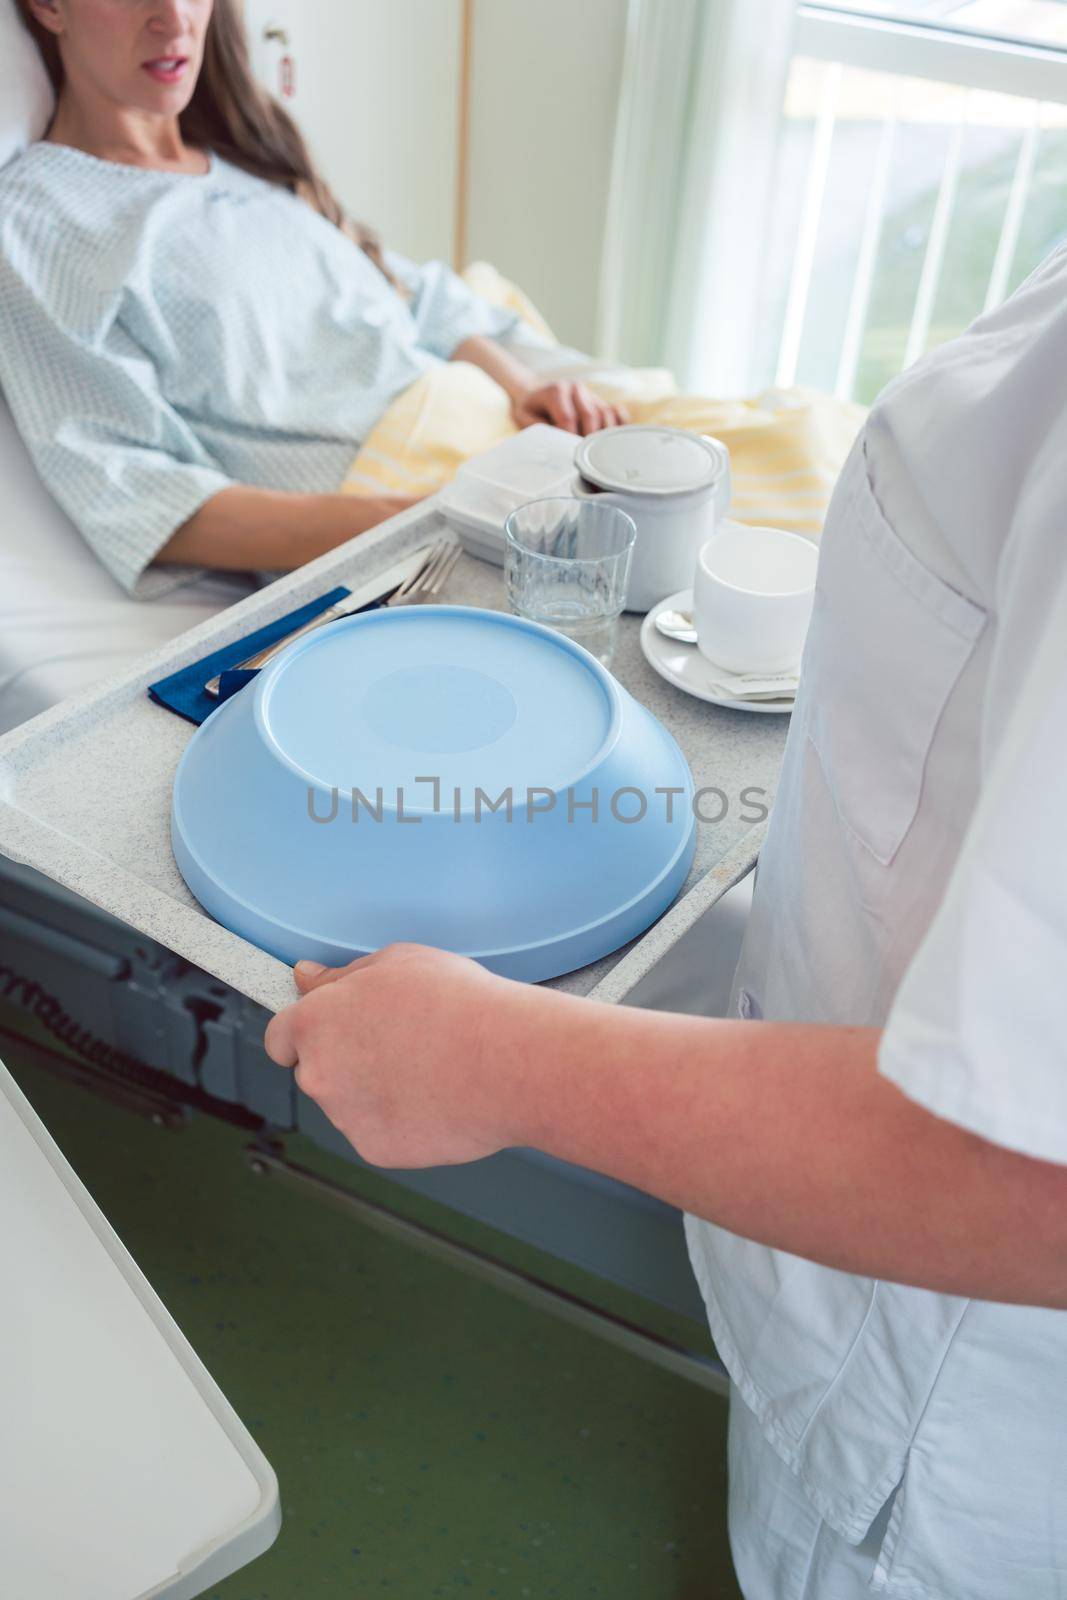 Nurse serving food in the hospital to a patient in bed by Kzenon